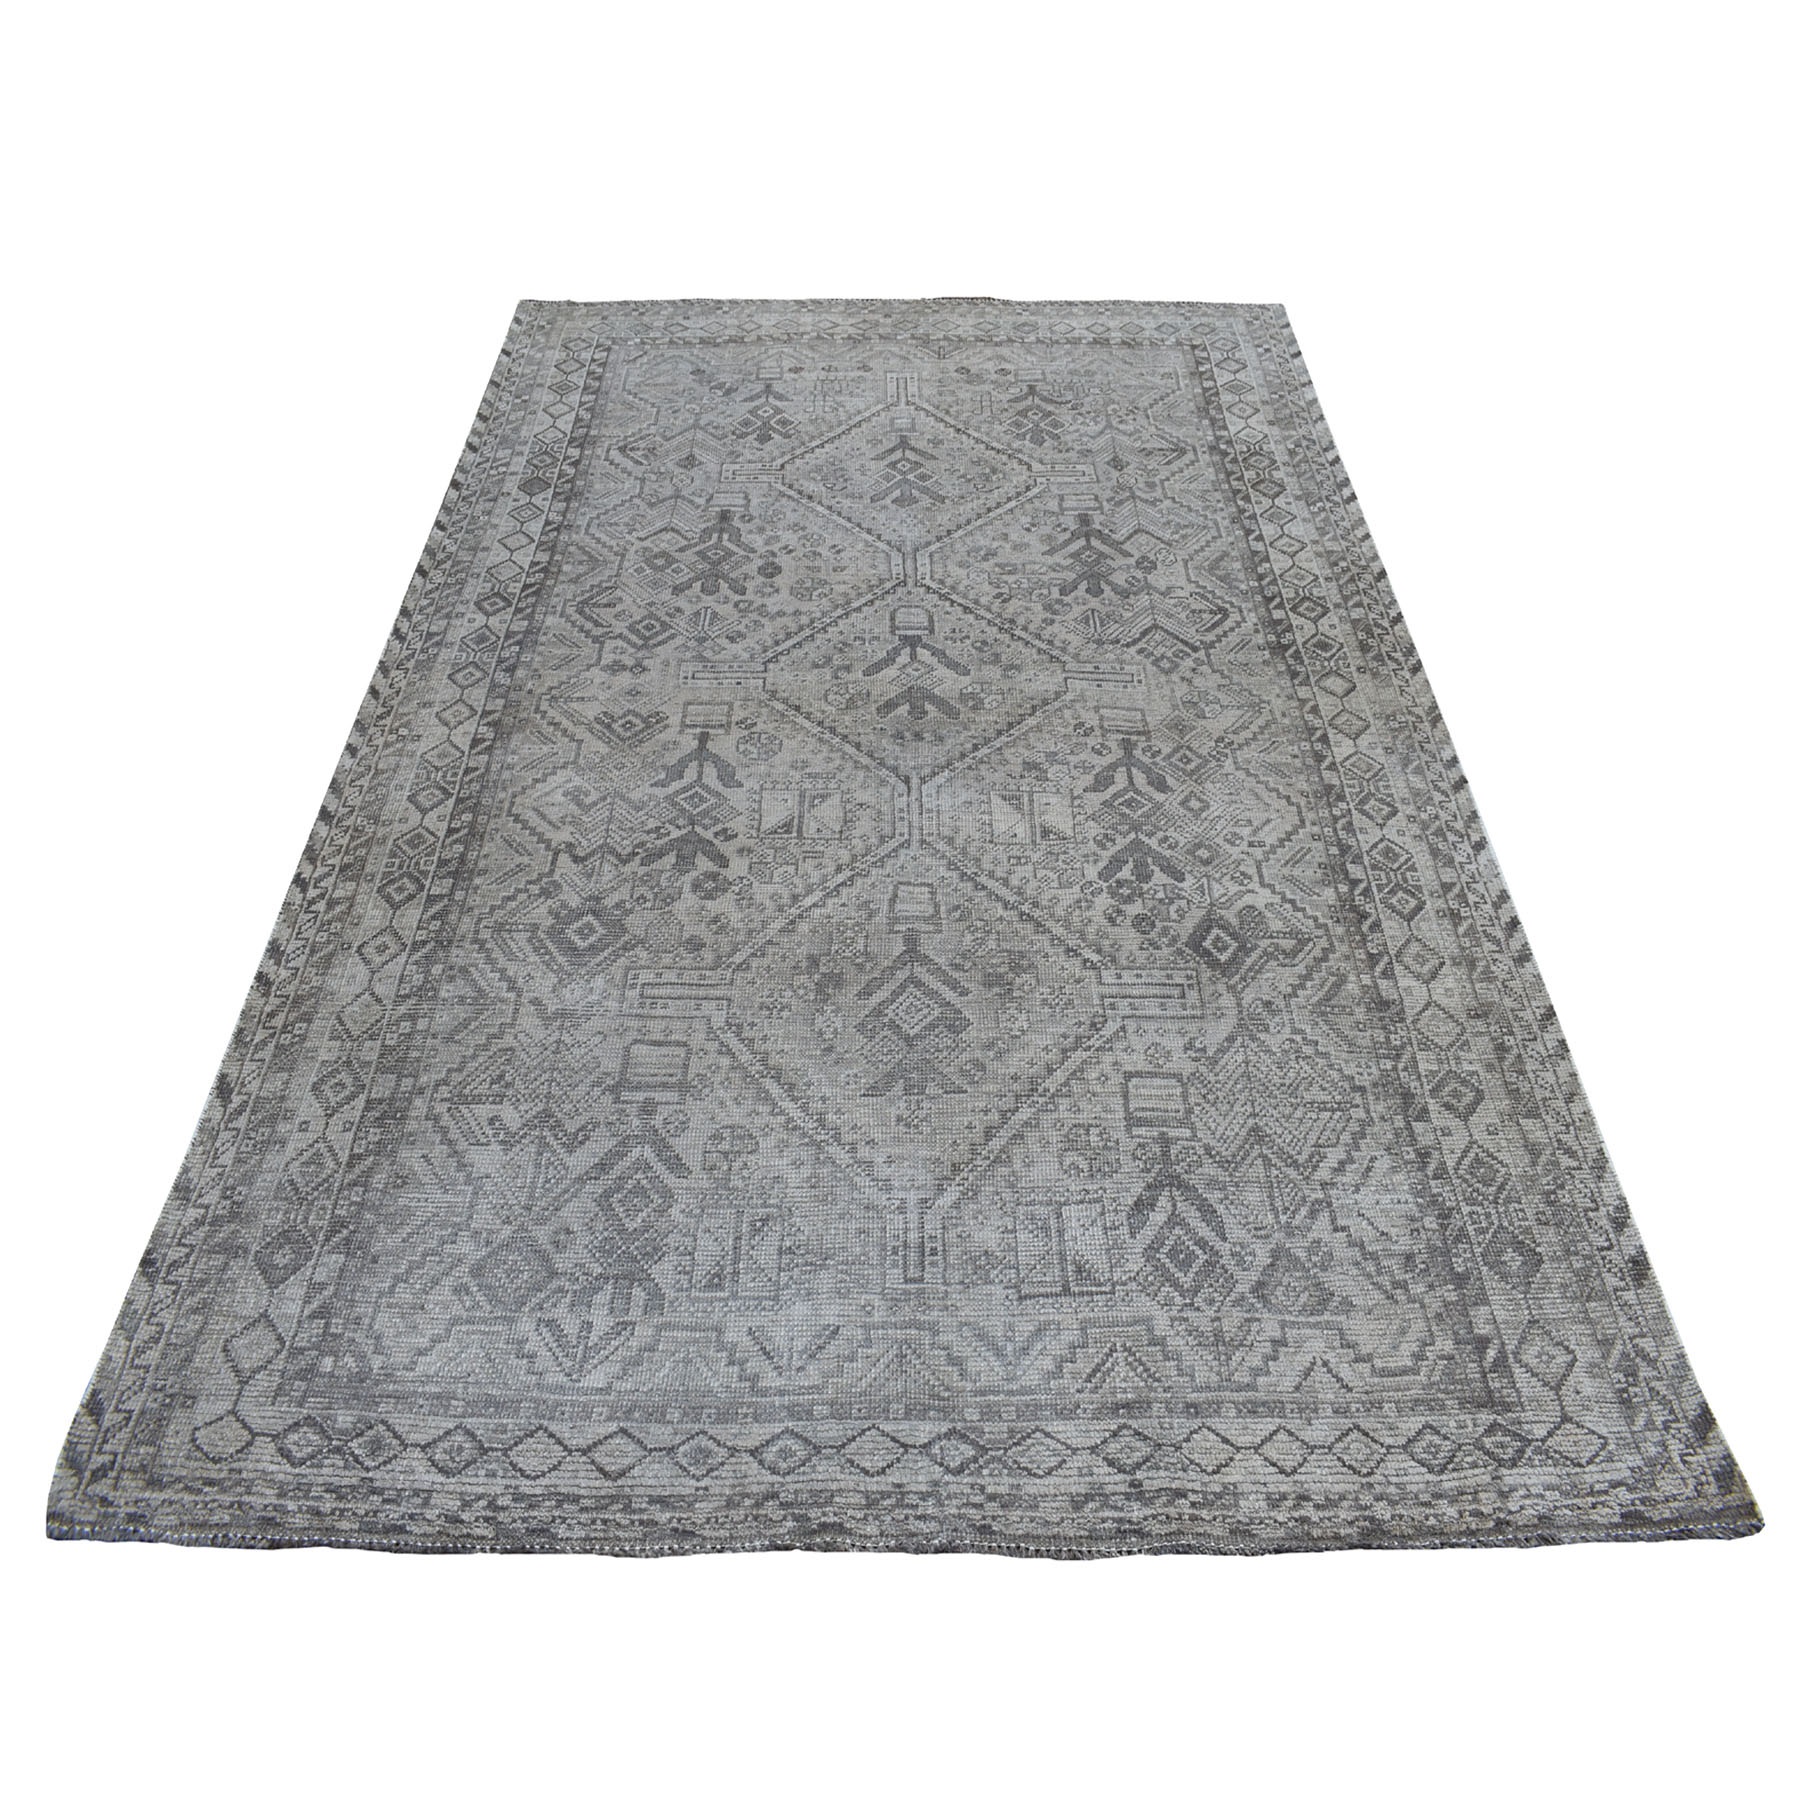 5'6"X8'2" Vintage And Worn Down Distressed Colors Persian Qashqai Hand Knotted Bohemian Rug moaed0dd